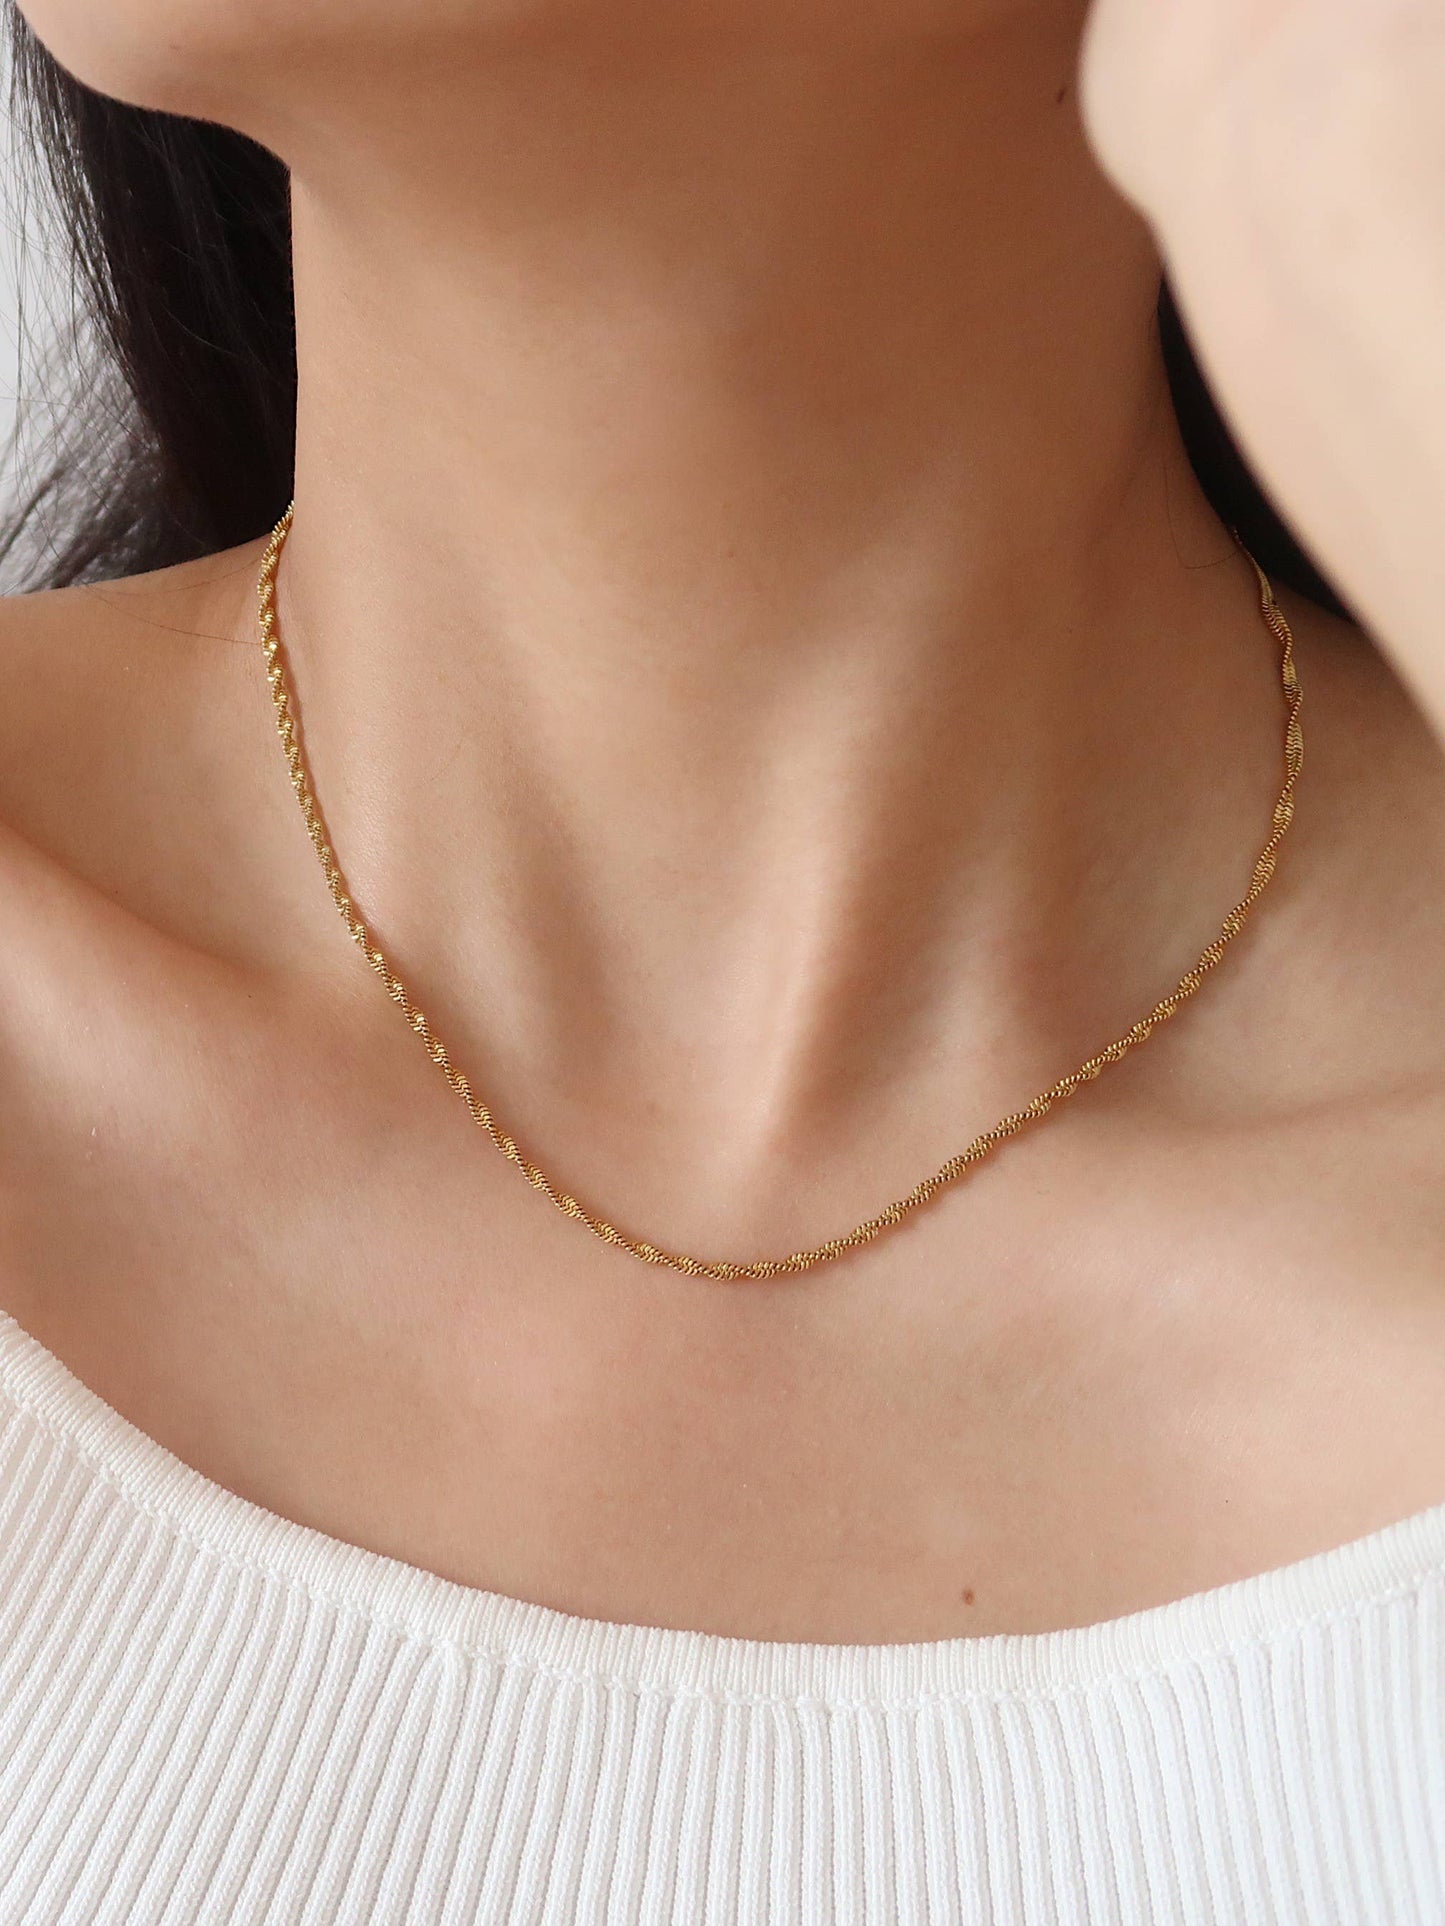 Gold Plated Rope Necklace, Gold Chain Necklace